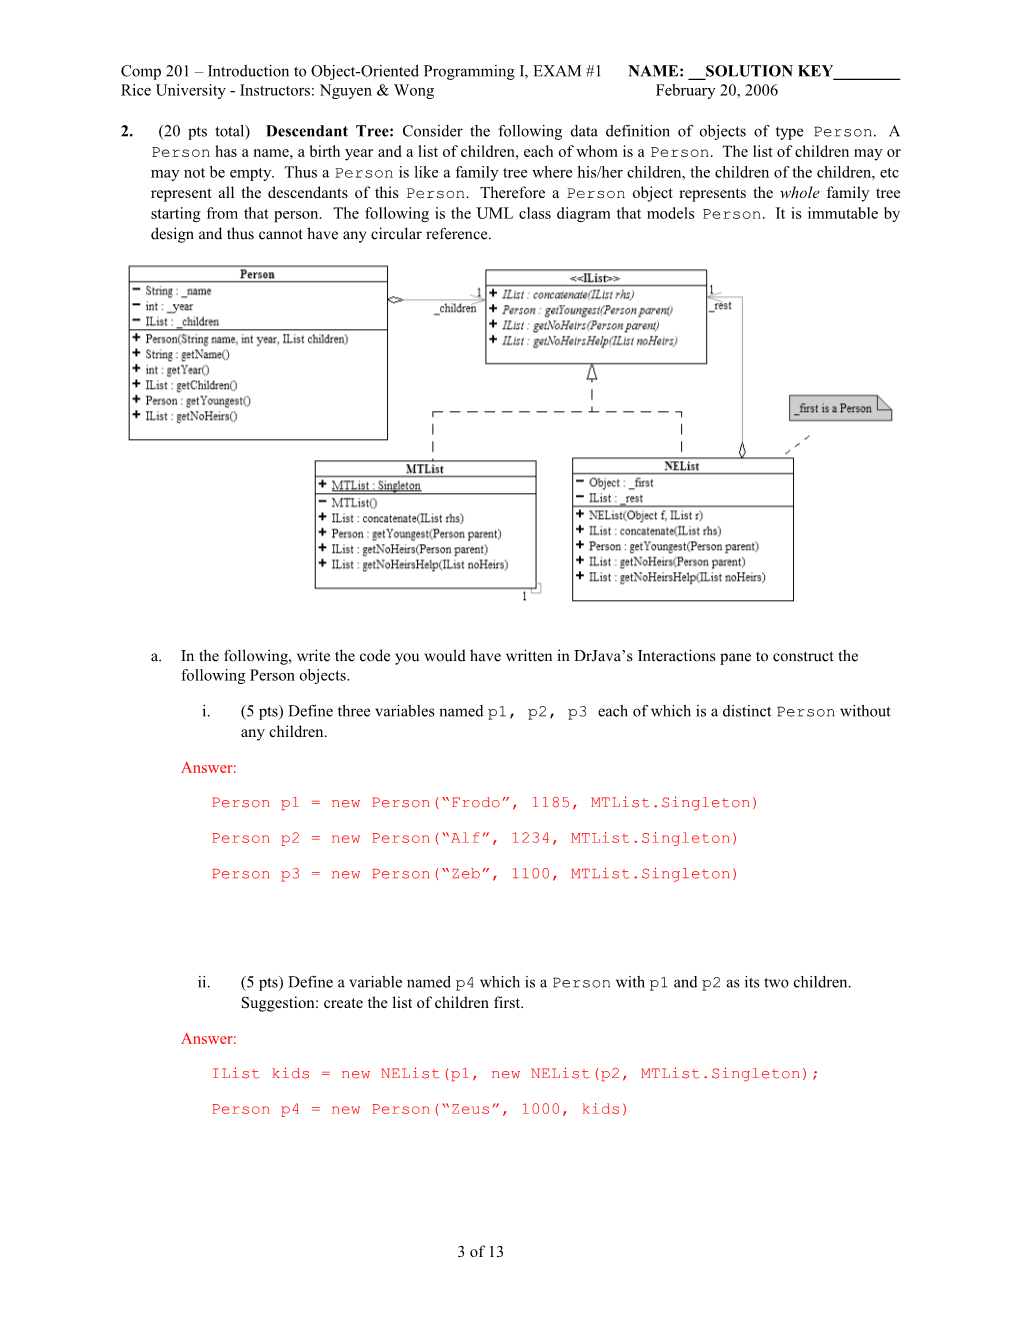 Comp 201 Introduction to Object-Oriented Programming I, EXAM #1 NAME: __SOLUTION KEY______